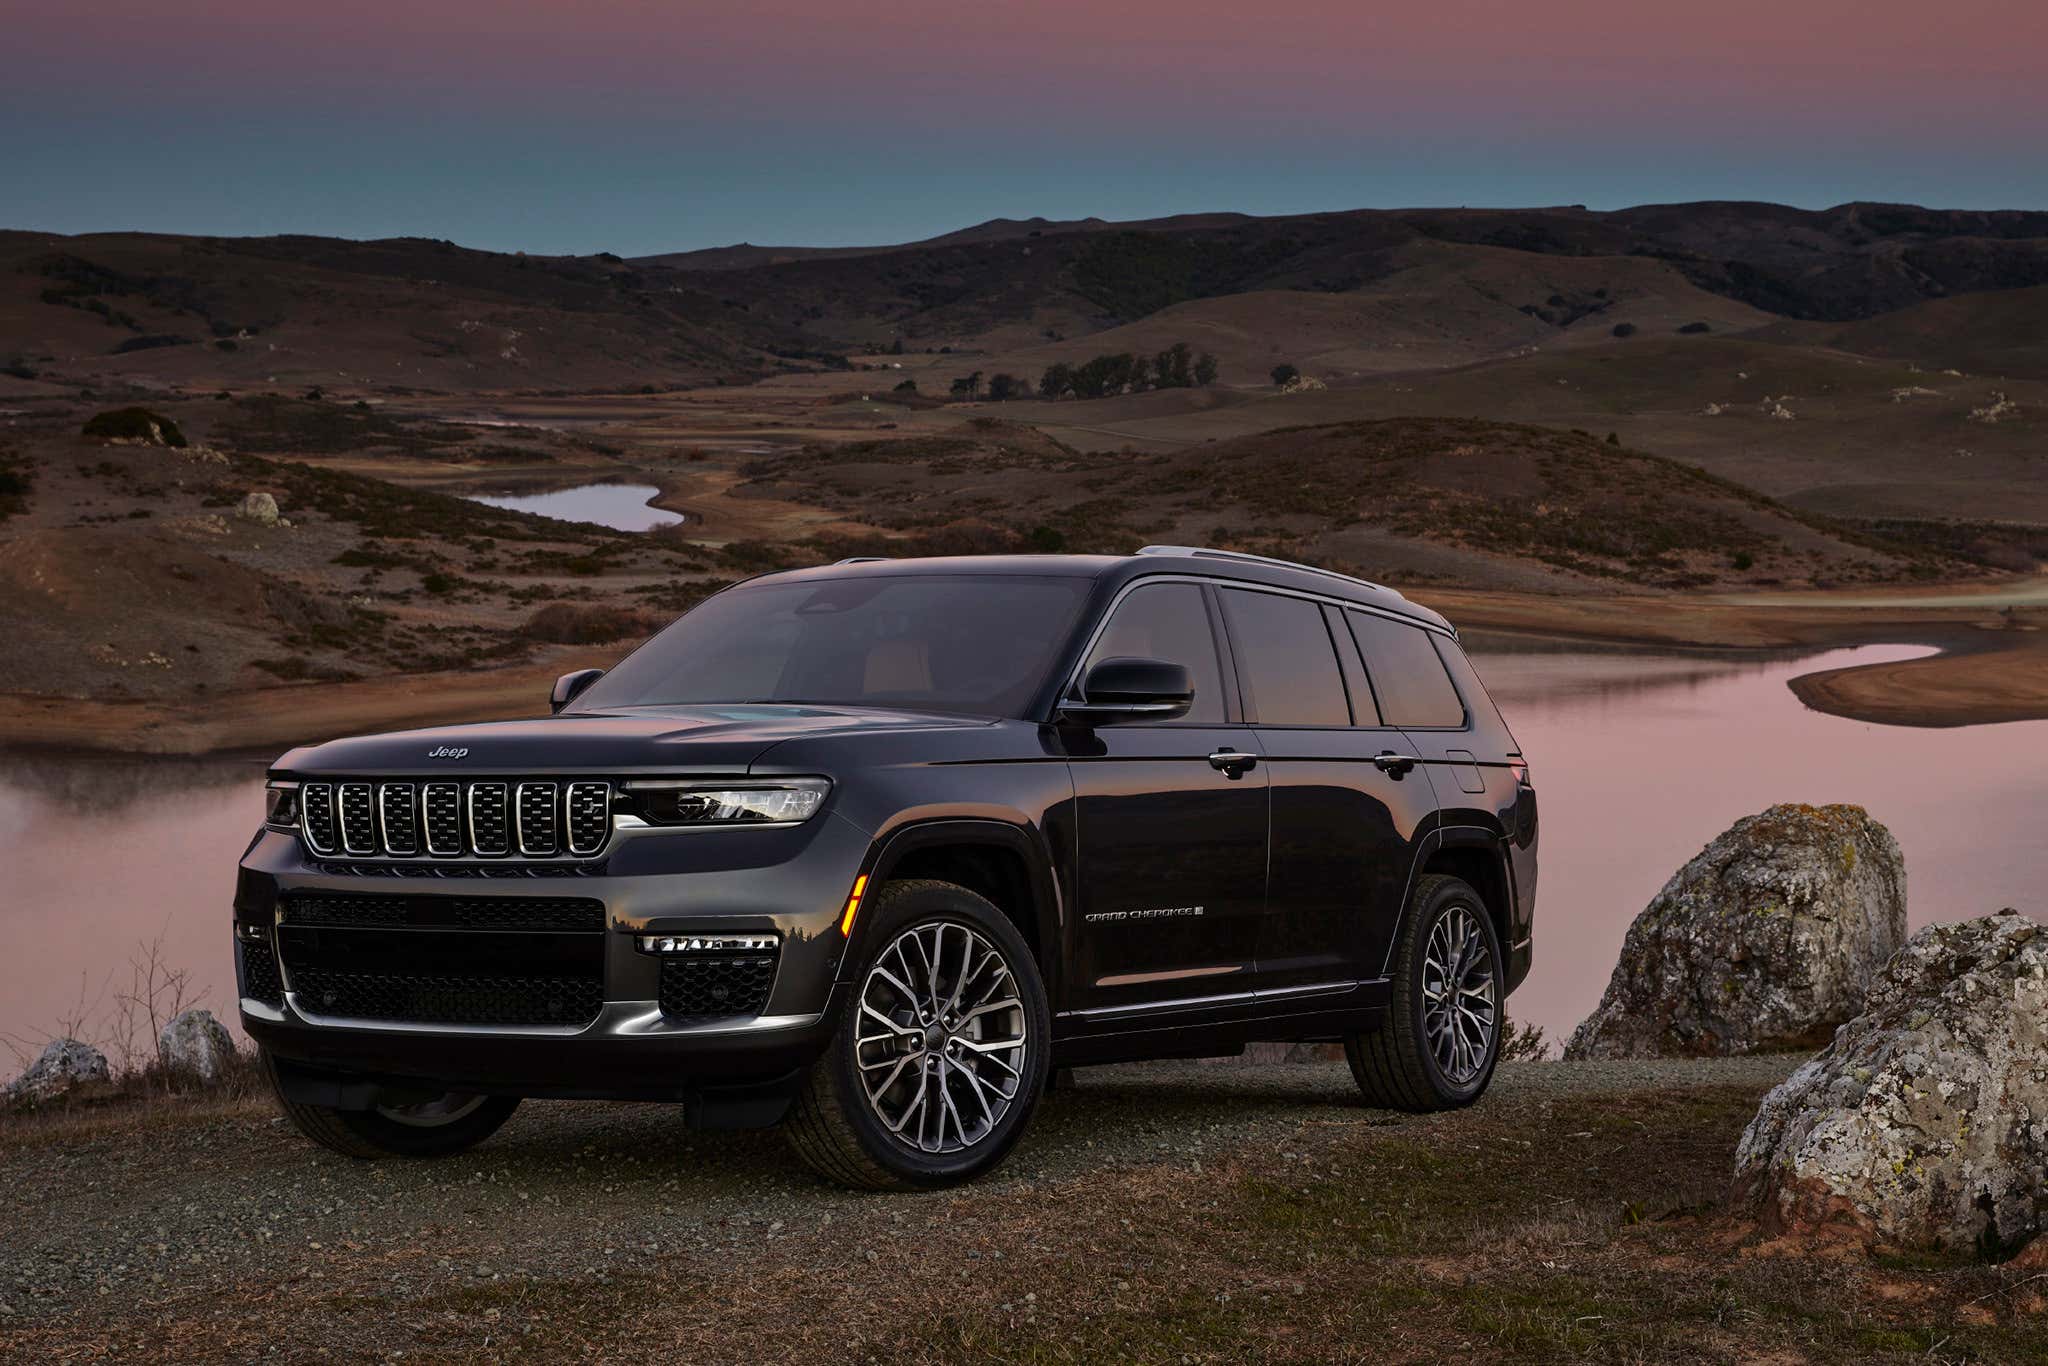 2021 Jeep Grand Cherokee L Review: Jeep's All-New Three-Row Is a Well-Rounded Surprise